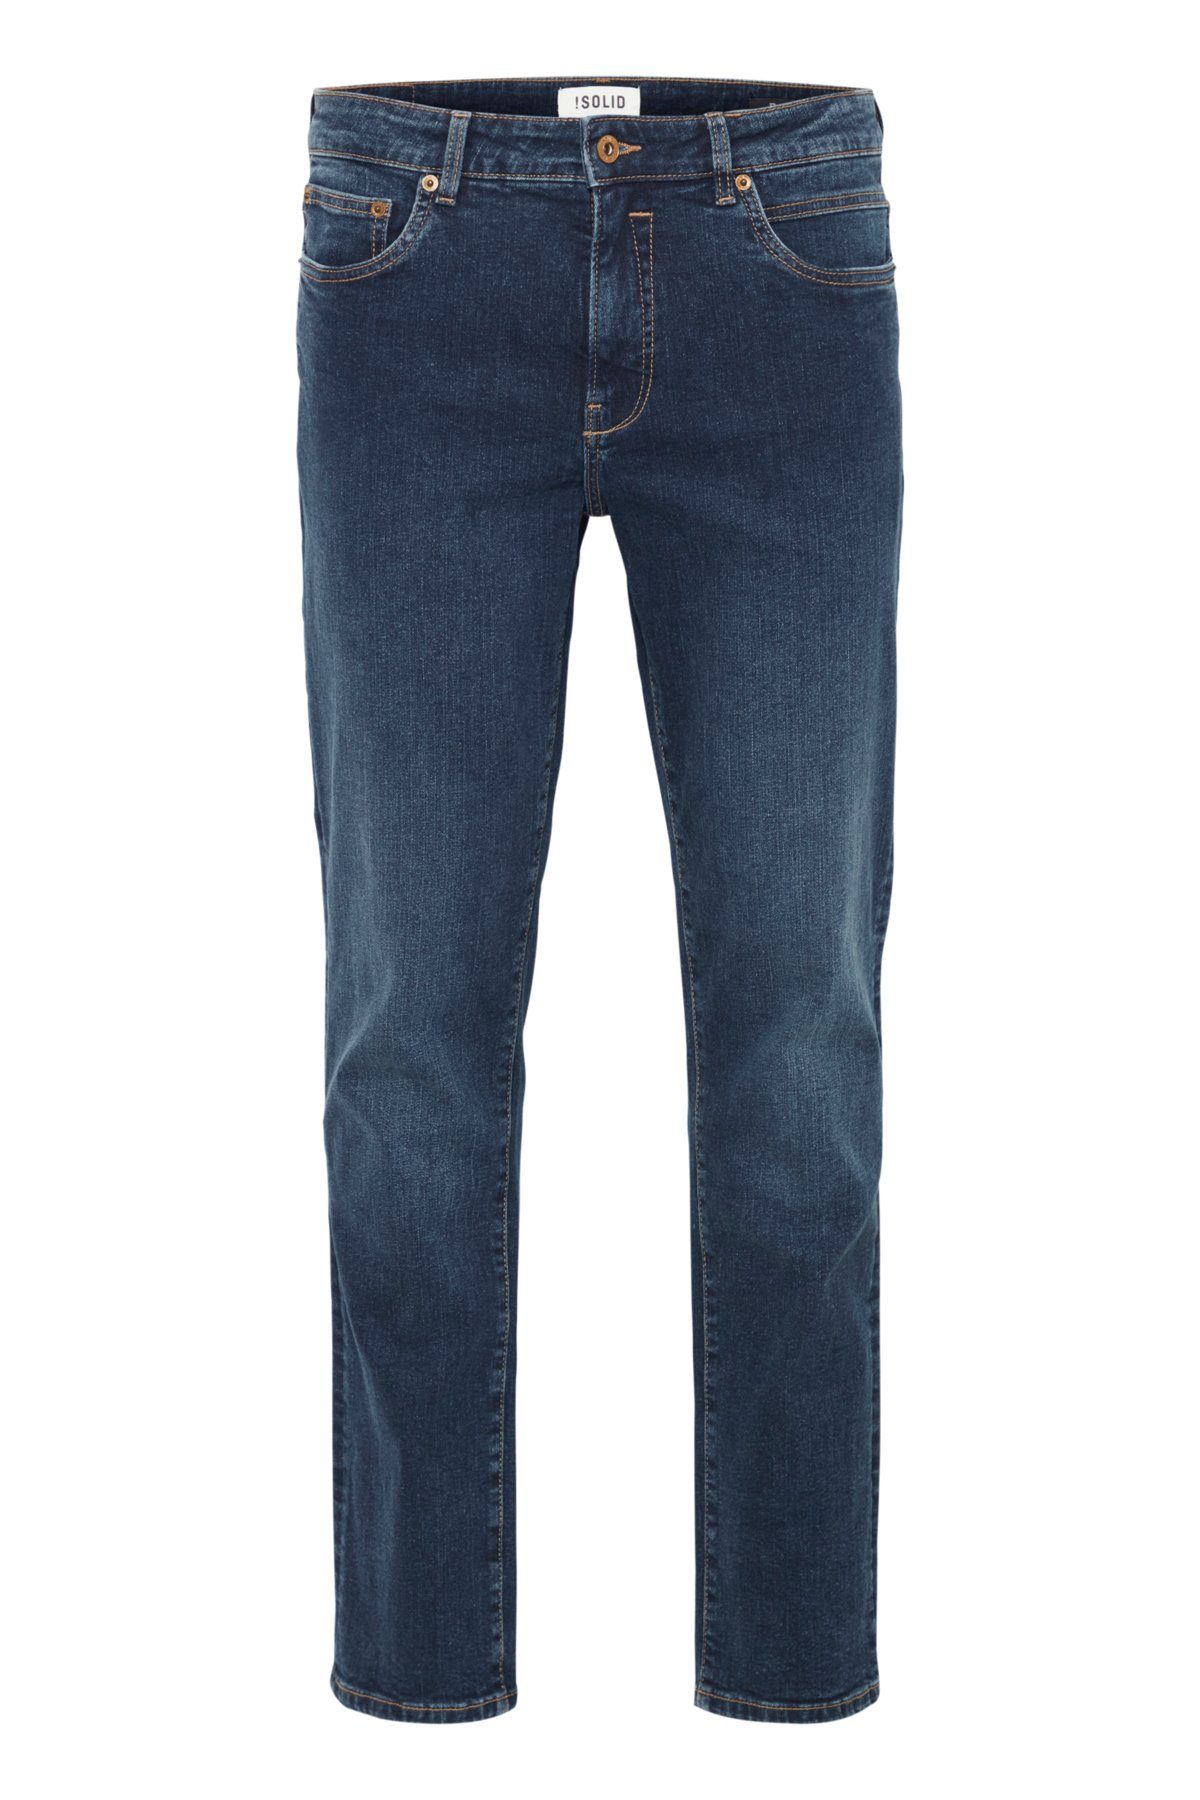 !Solid Straight-Jeans !SOLID Jeans Dunley Ryder